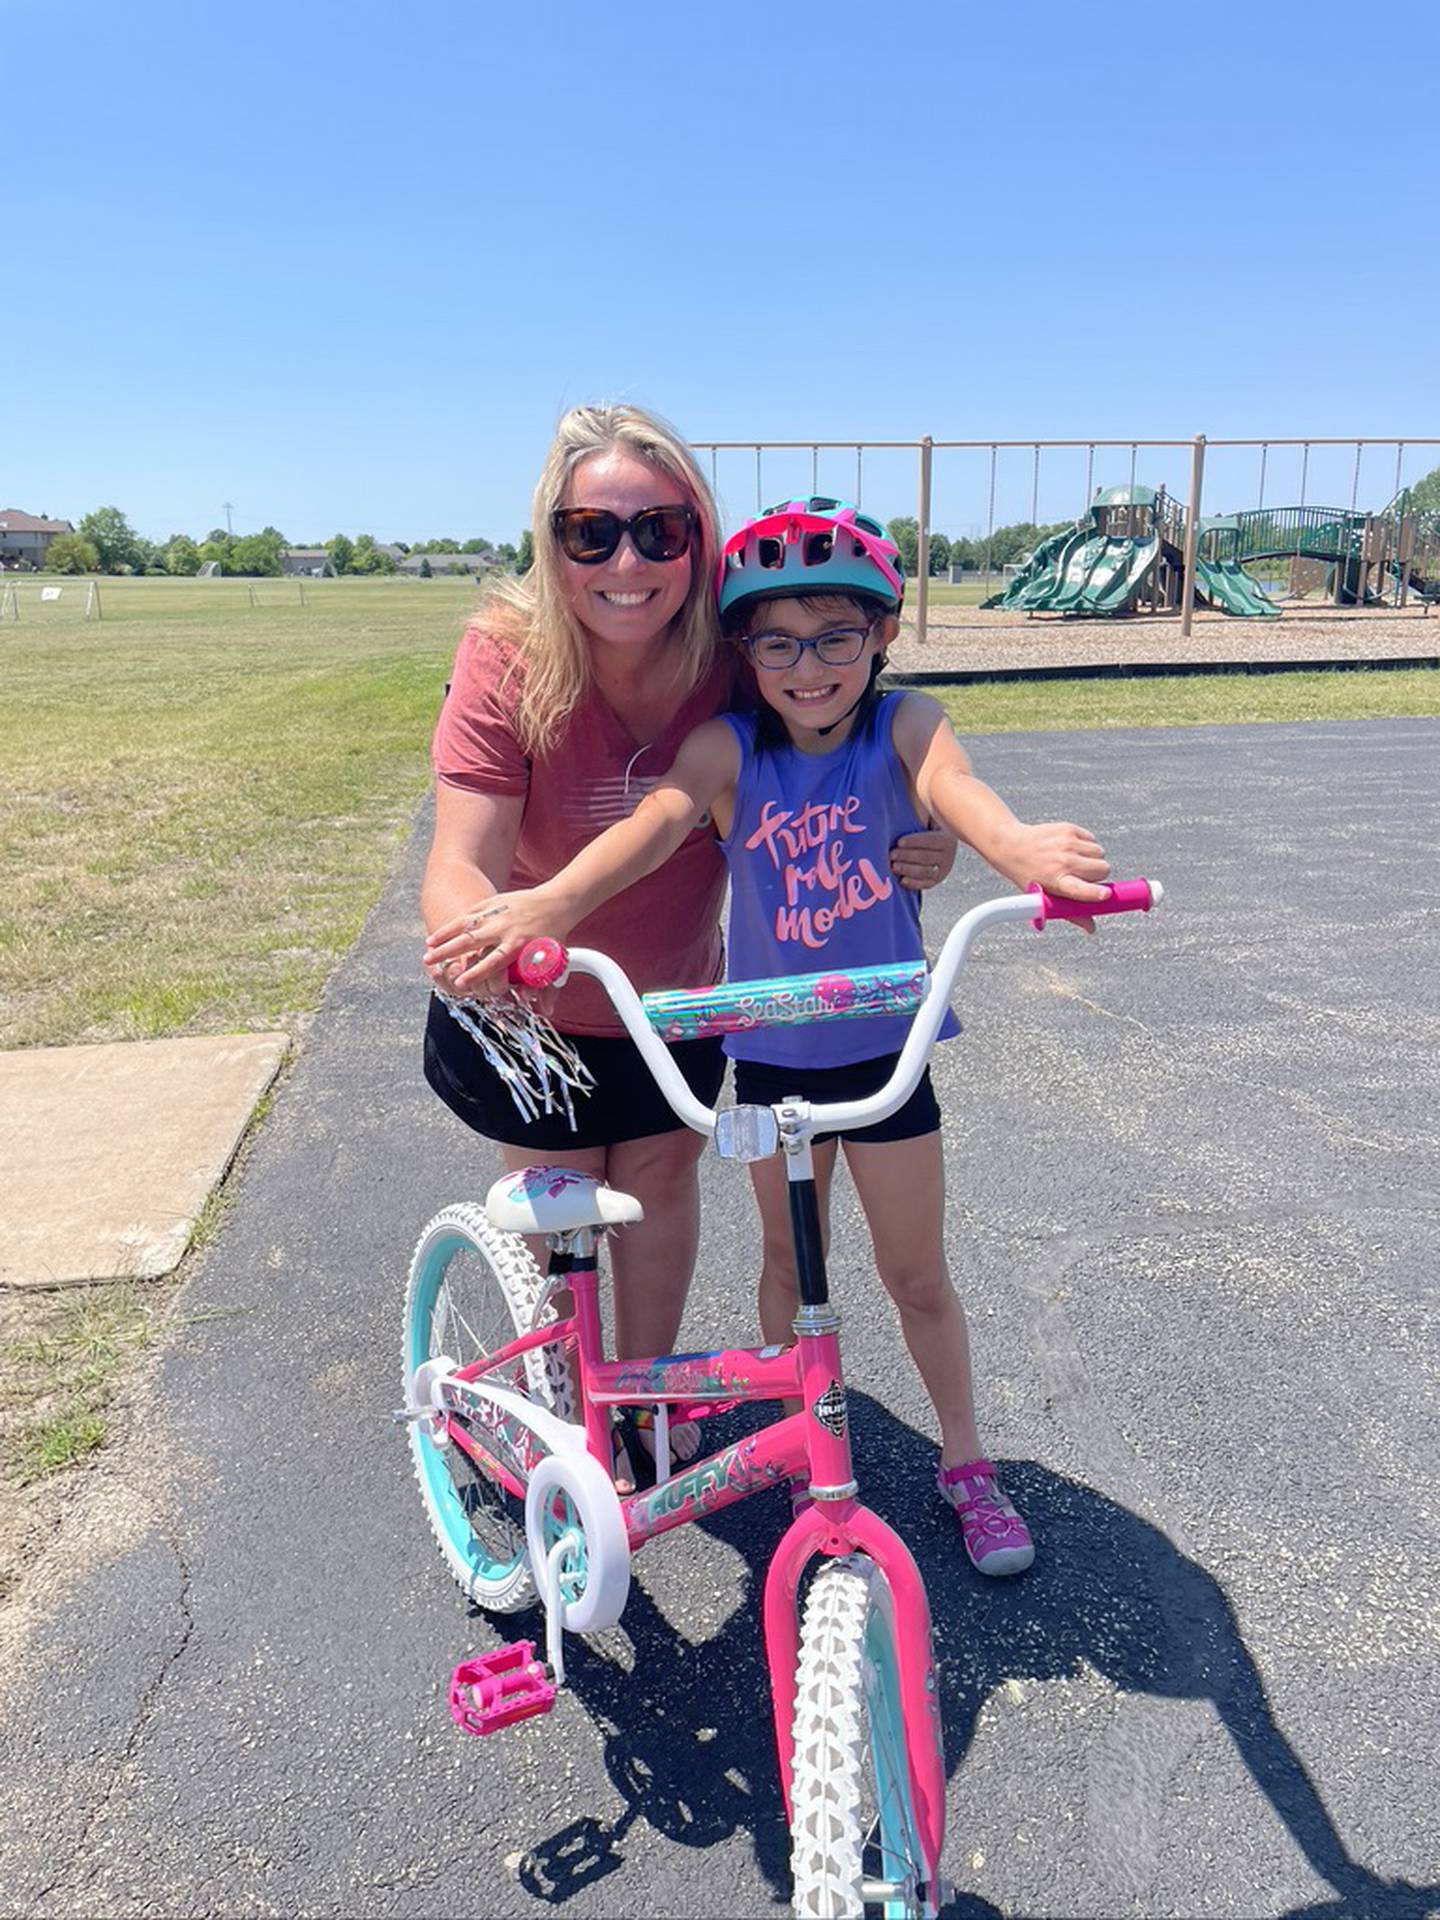 Jennifer Consolino of Homer Glen, a village trustee, said her 8-year-old daughter Genevieve pose for a photo at the recent iCan Bike program, which teaches people with disabilities ages 8 and up to ride a conventional two-wheel bike. The program was held June 14 to June 18, 2021, at Spencer Crossing School in New Lenox.